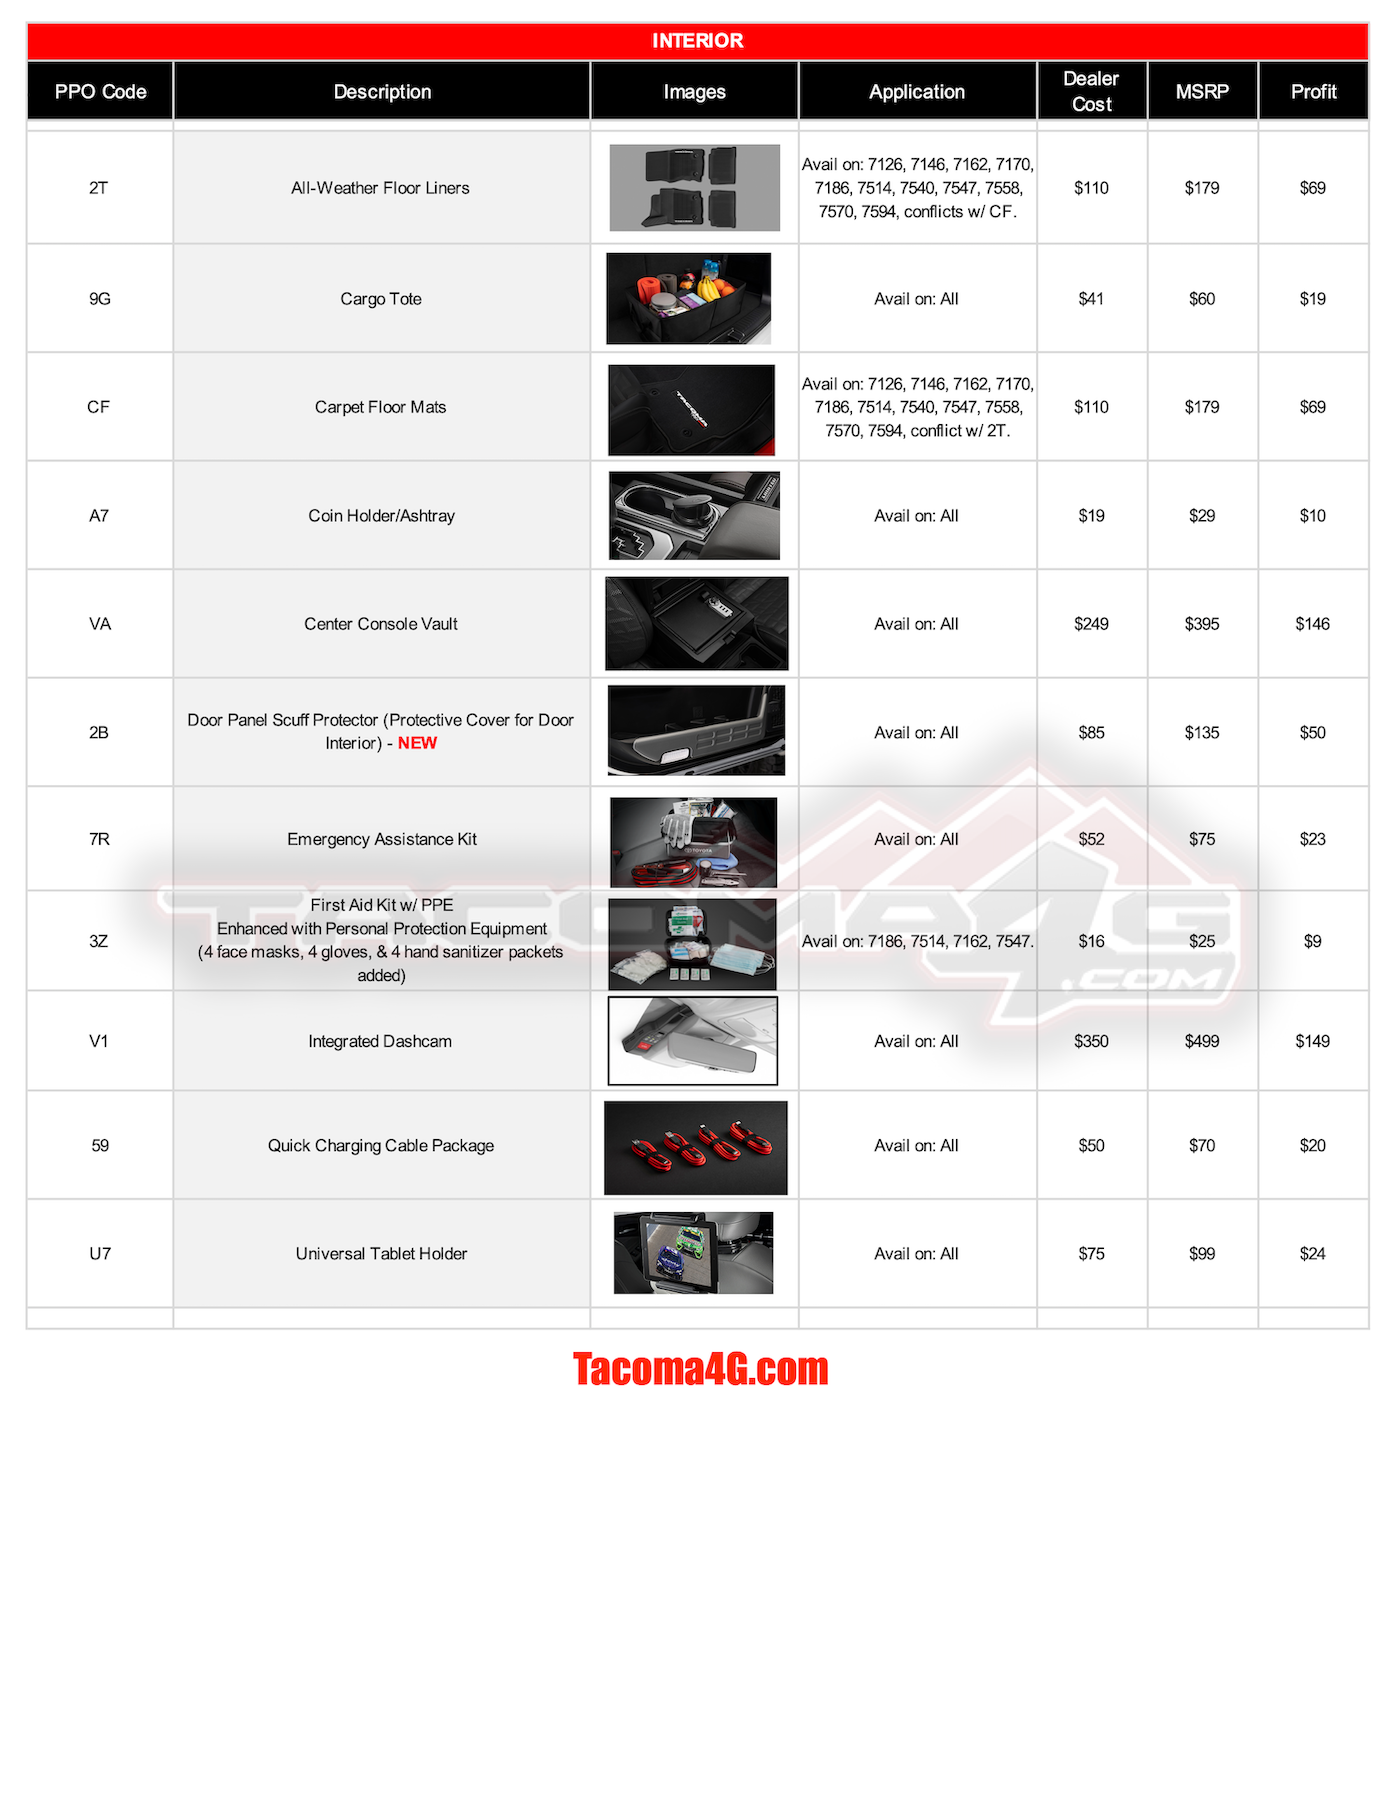 2024 Tacoma 2024 Tacoma Post-Production Options (PPO) Guide - OEM / TRD Accessories Parts + Pricing!  [UPDATED 5-7-24] MY24 Tacoma PPO Guide_04_02_24-5